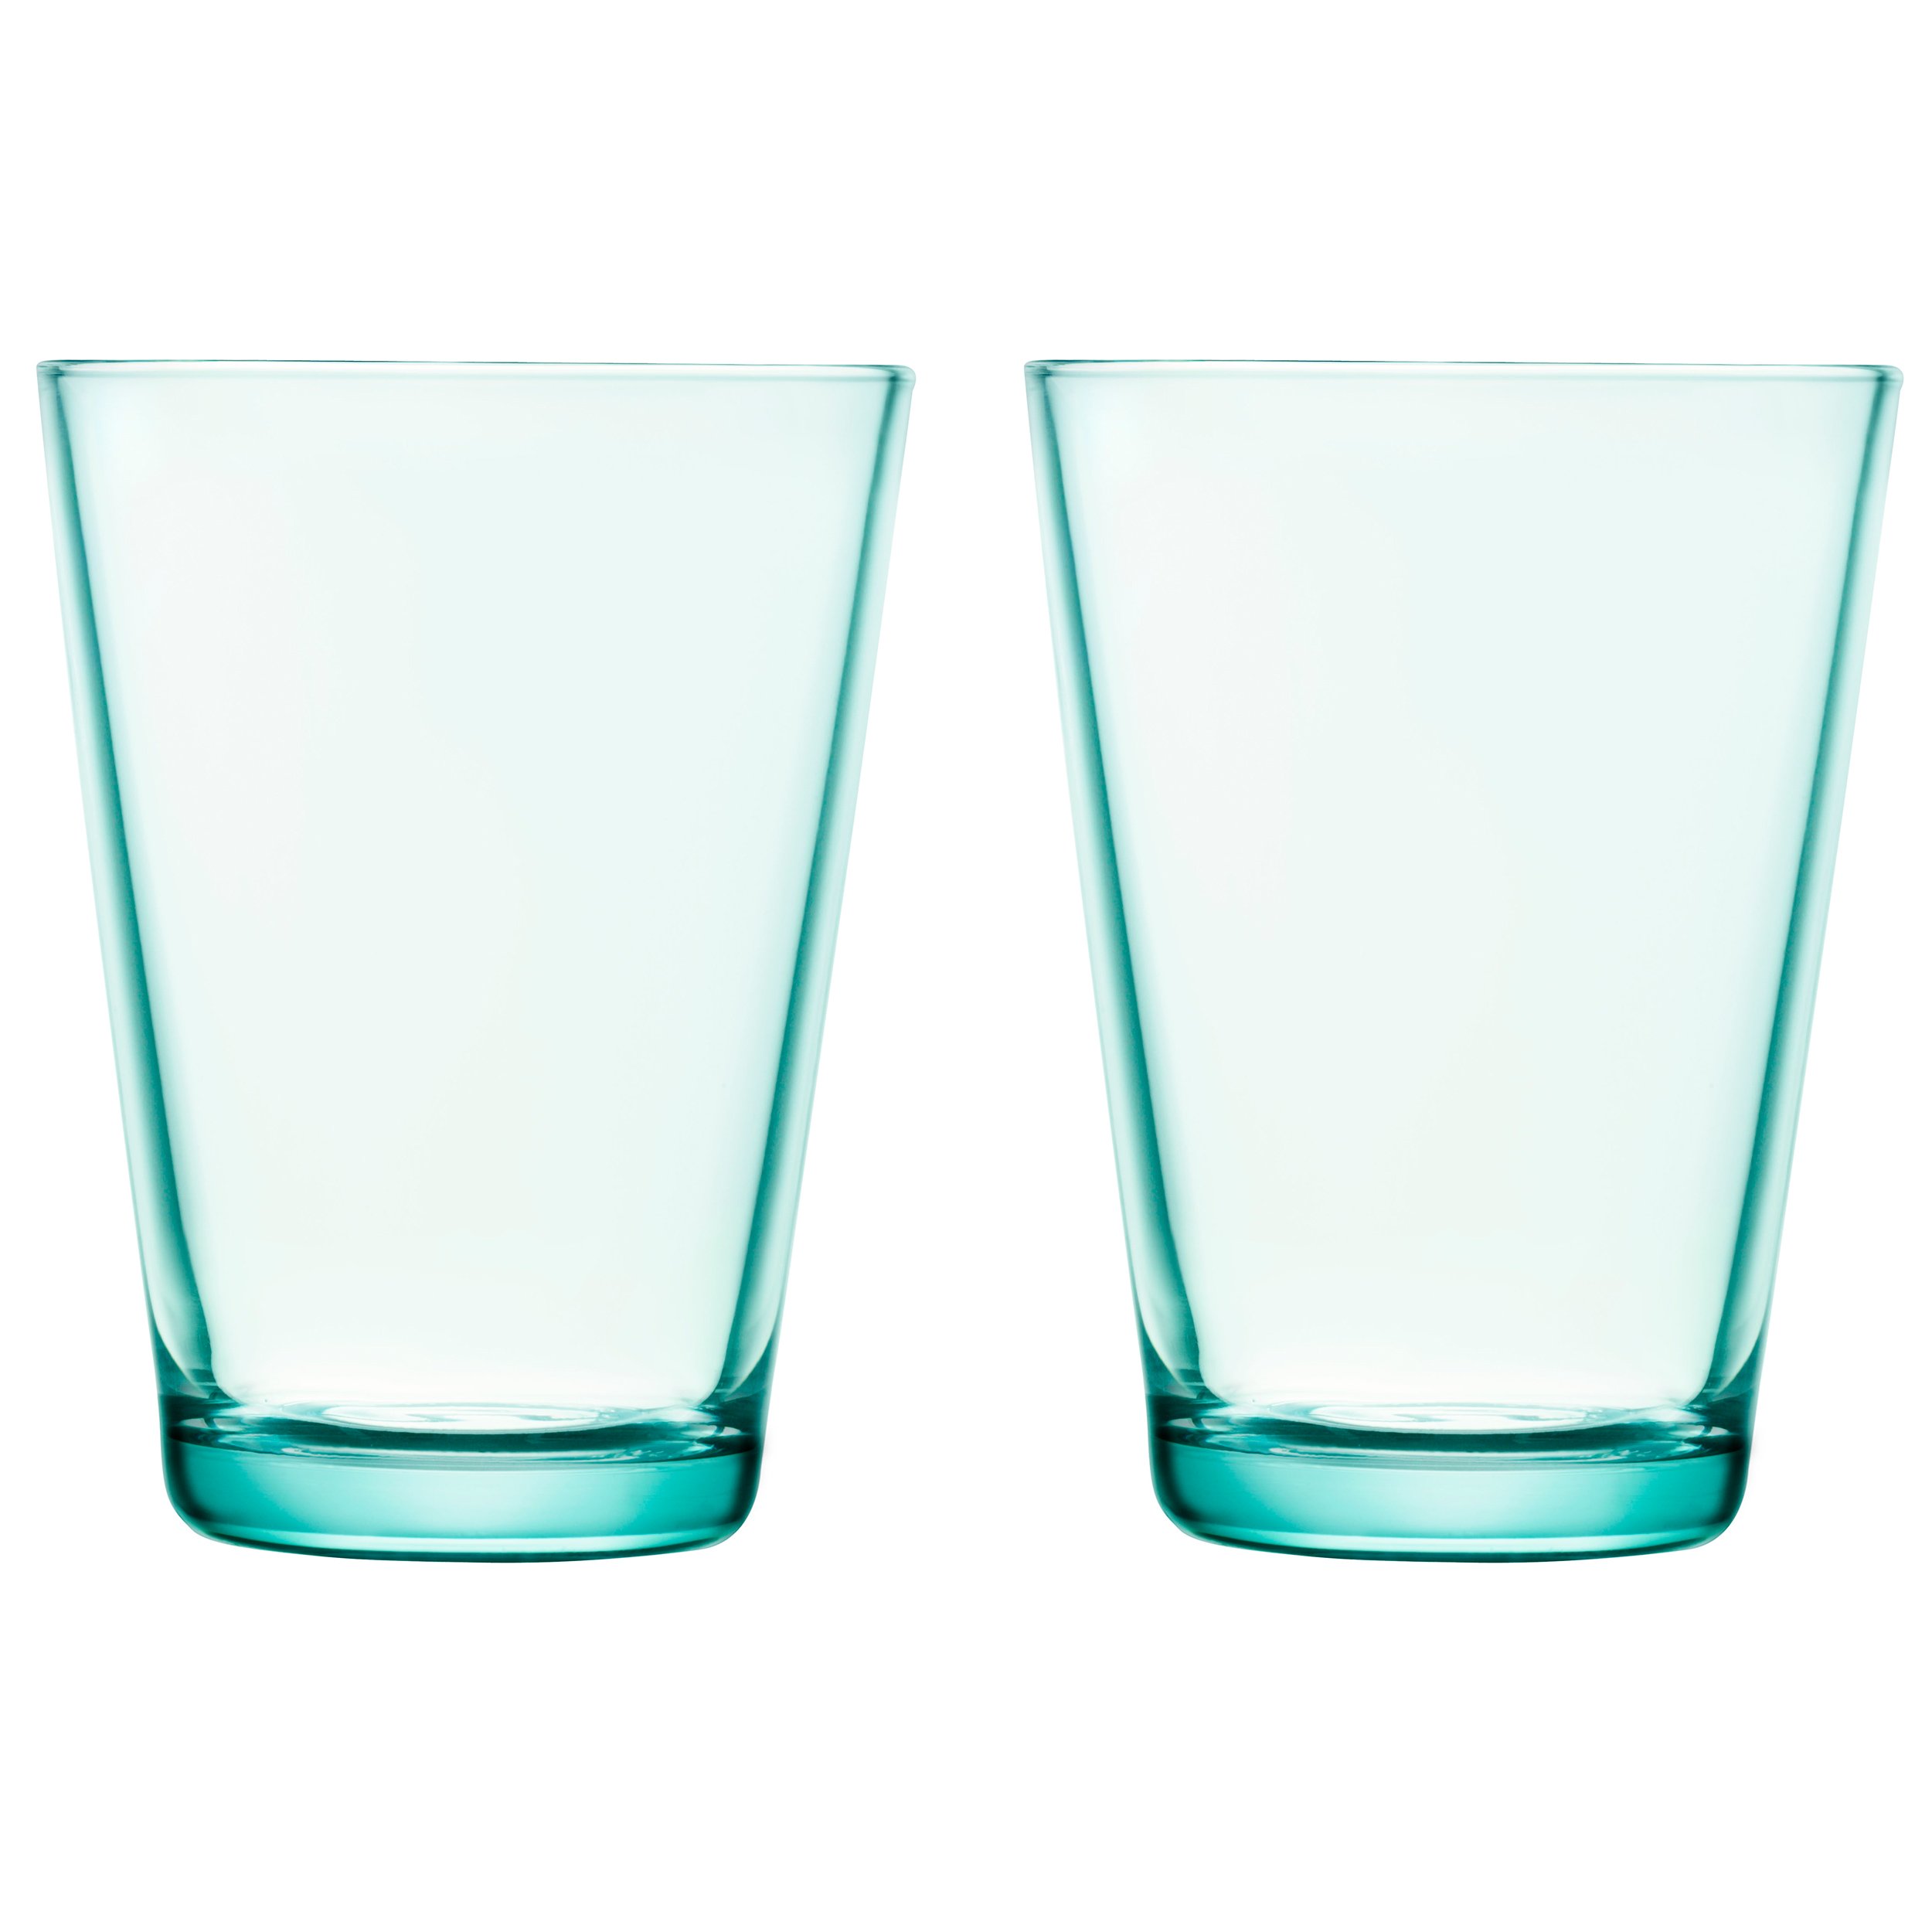 Kartio Drinking Glasses Clear, 4-pack